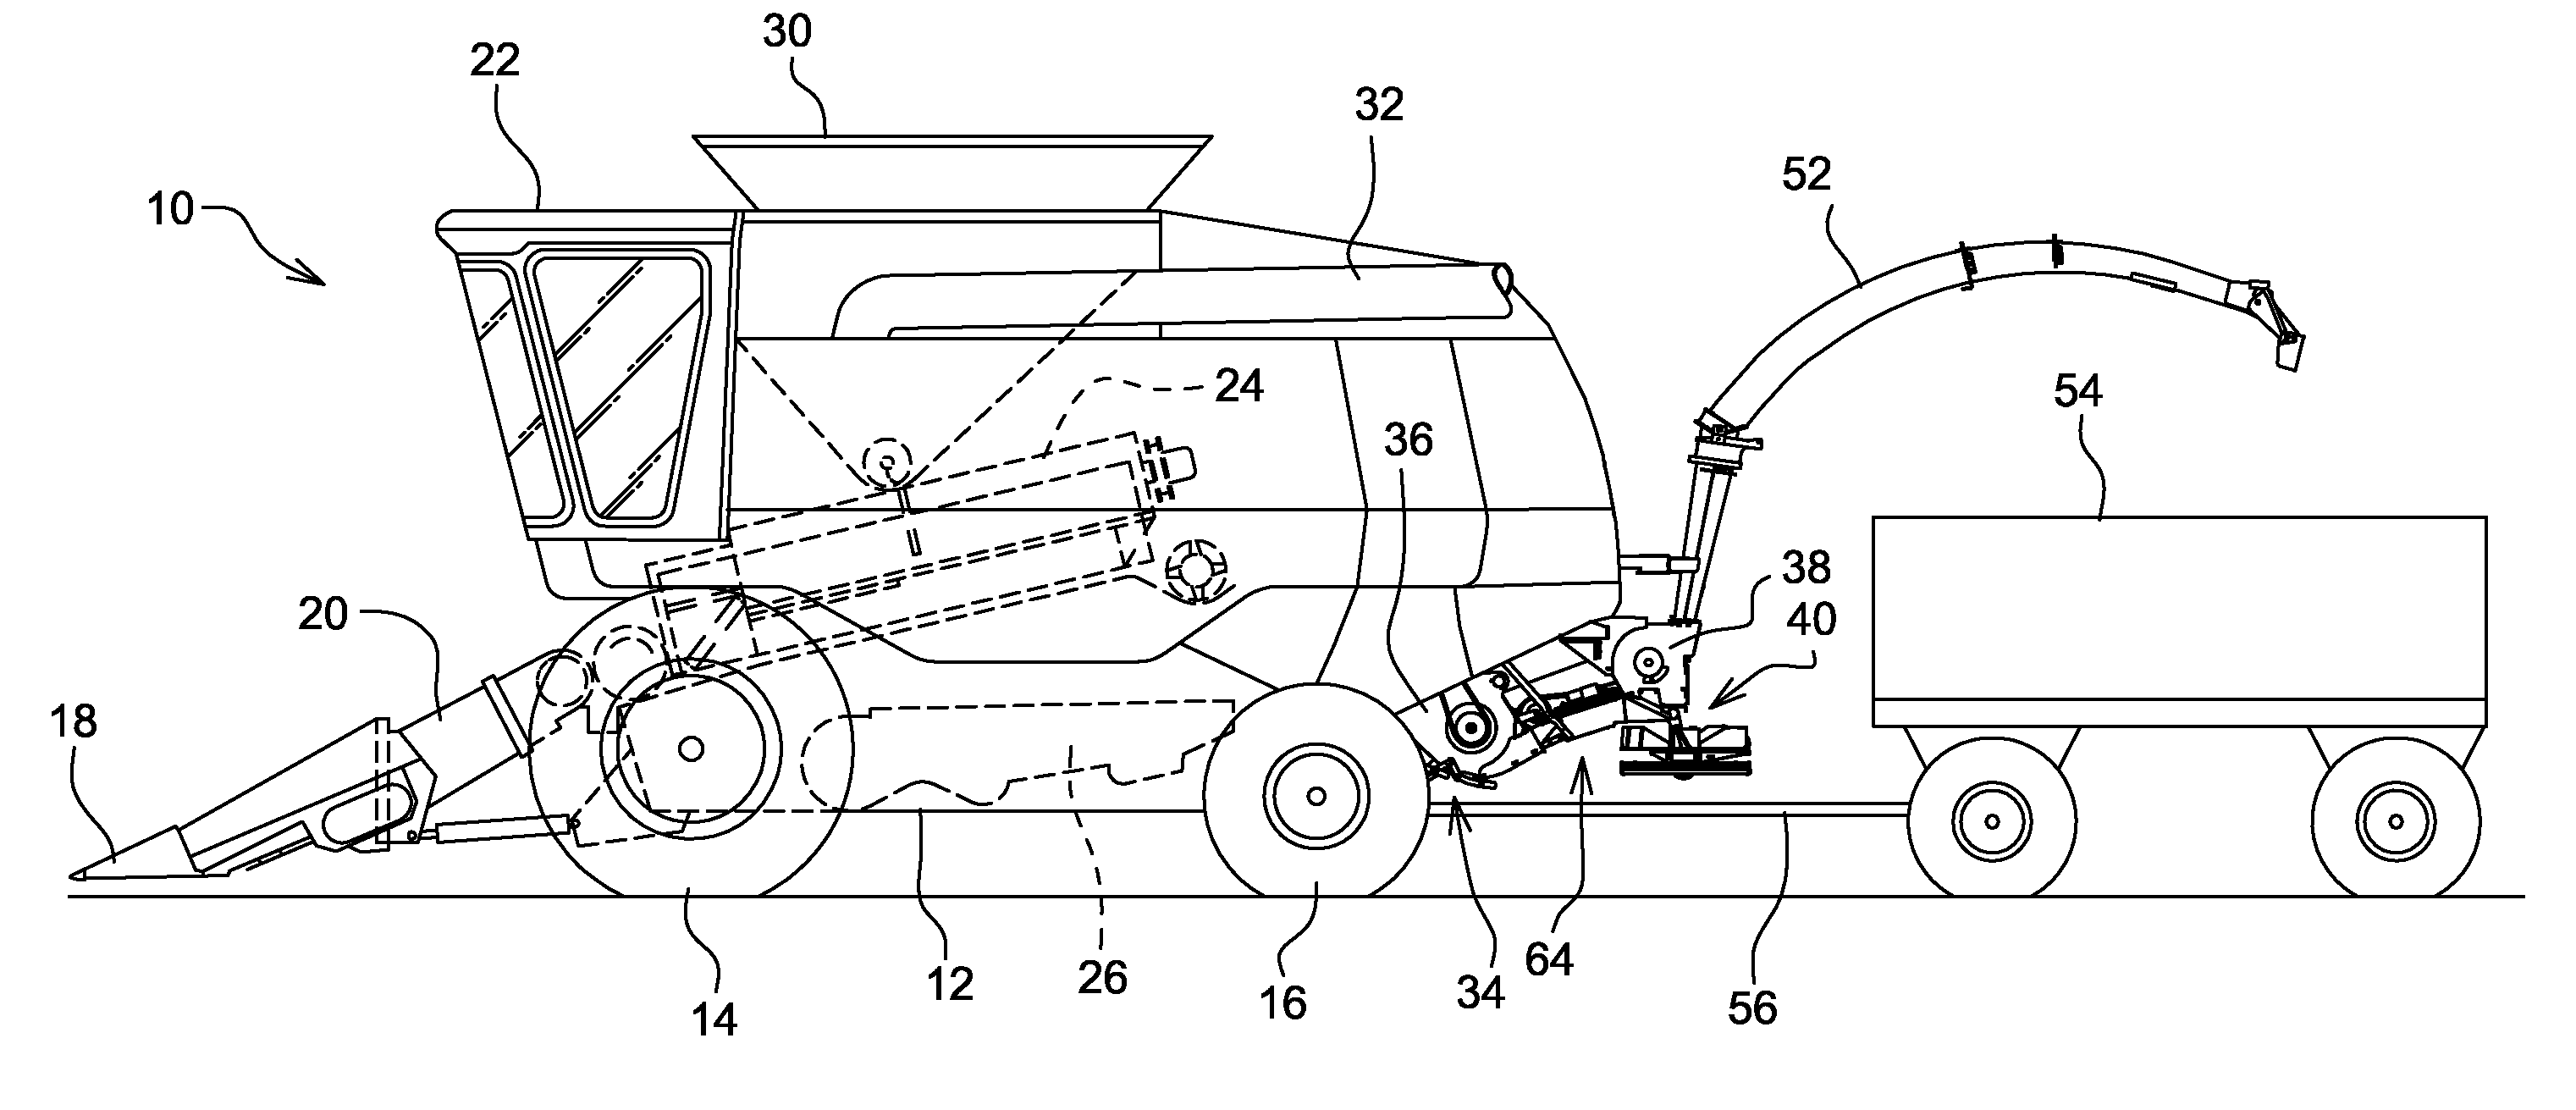 Variable Rate Diverter For A Crop Residue Collecting Device Carried By A Combine Harvester